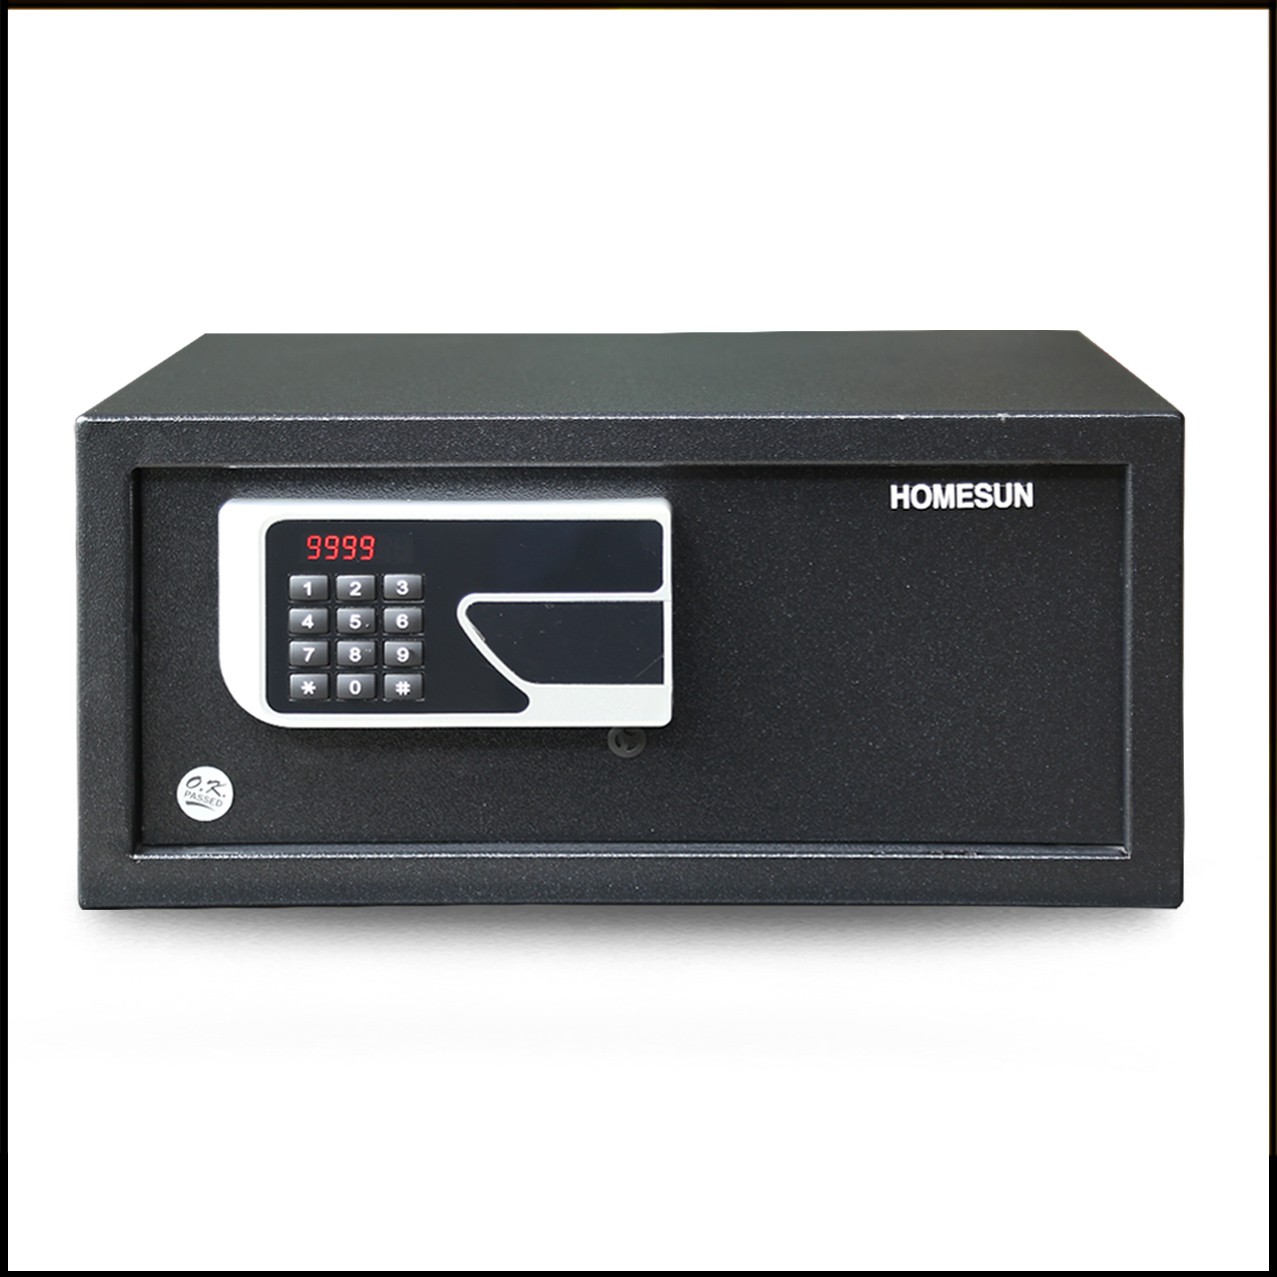 Hotel Room Security Wholesale Suppliers Brands